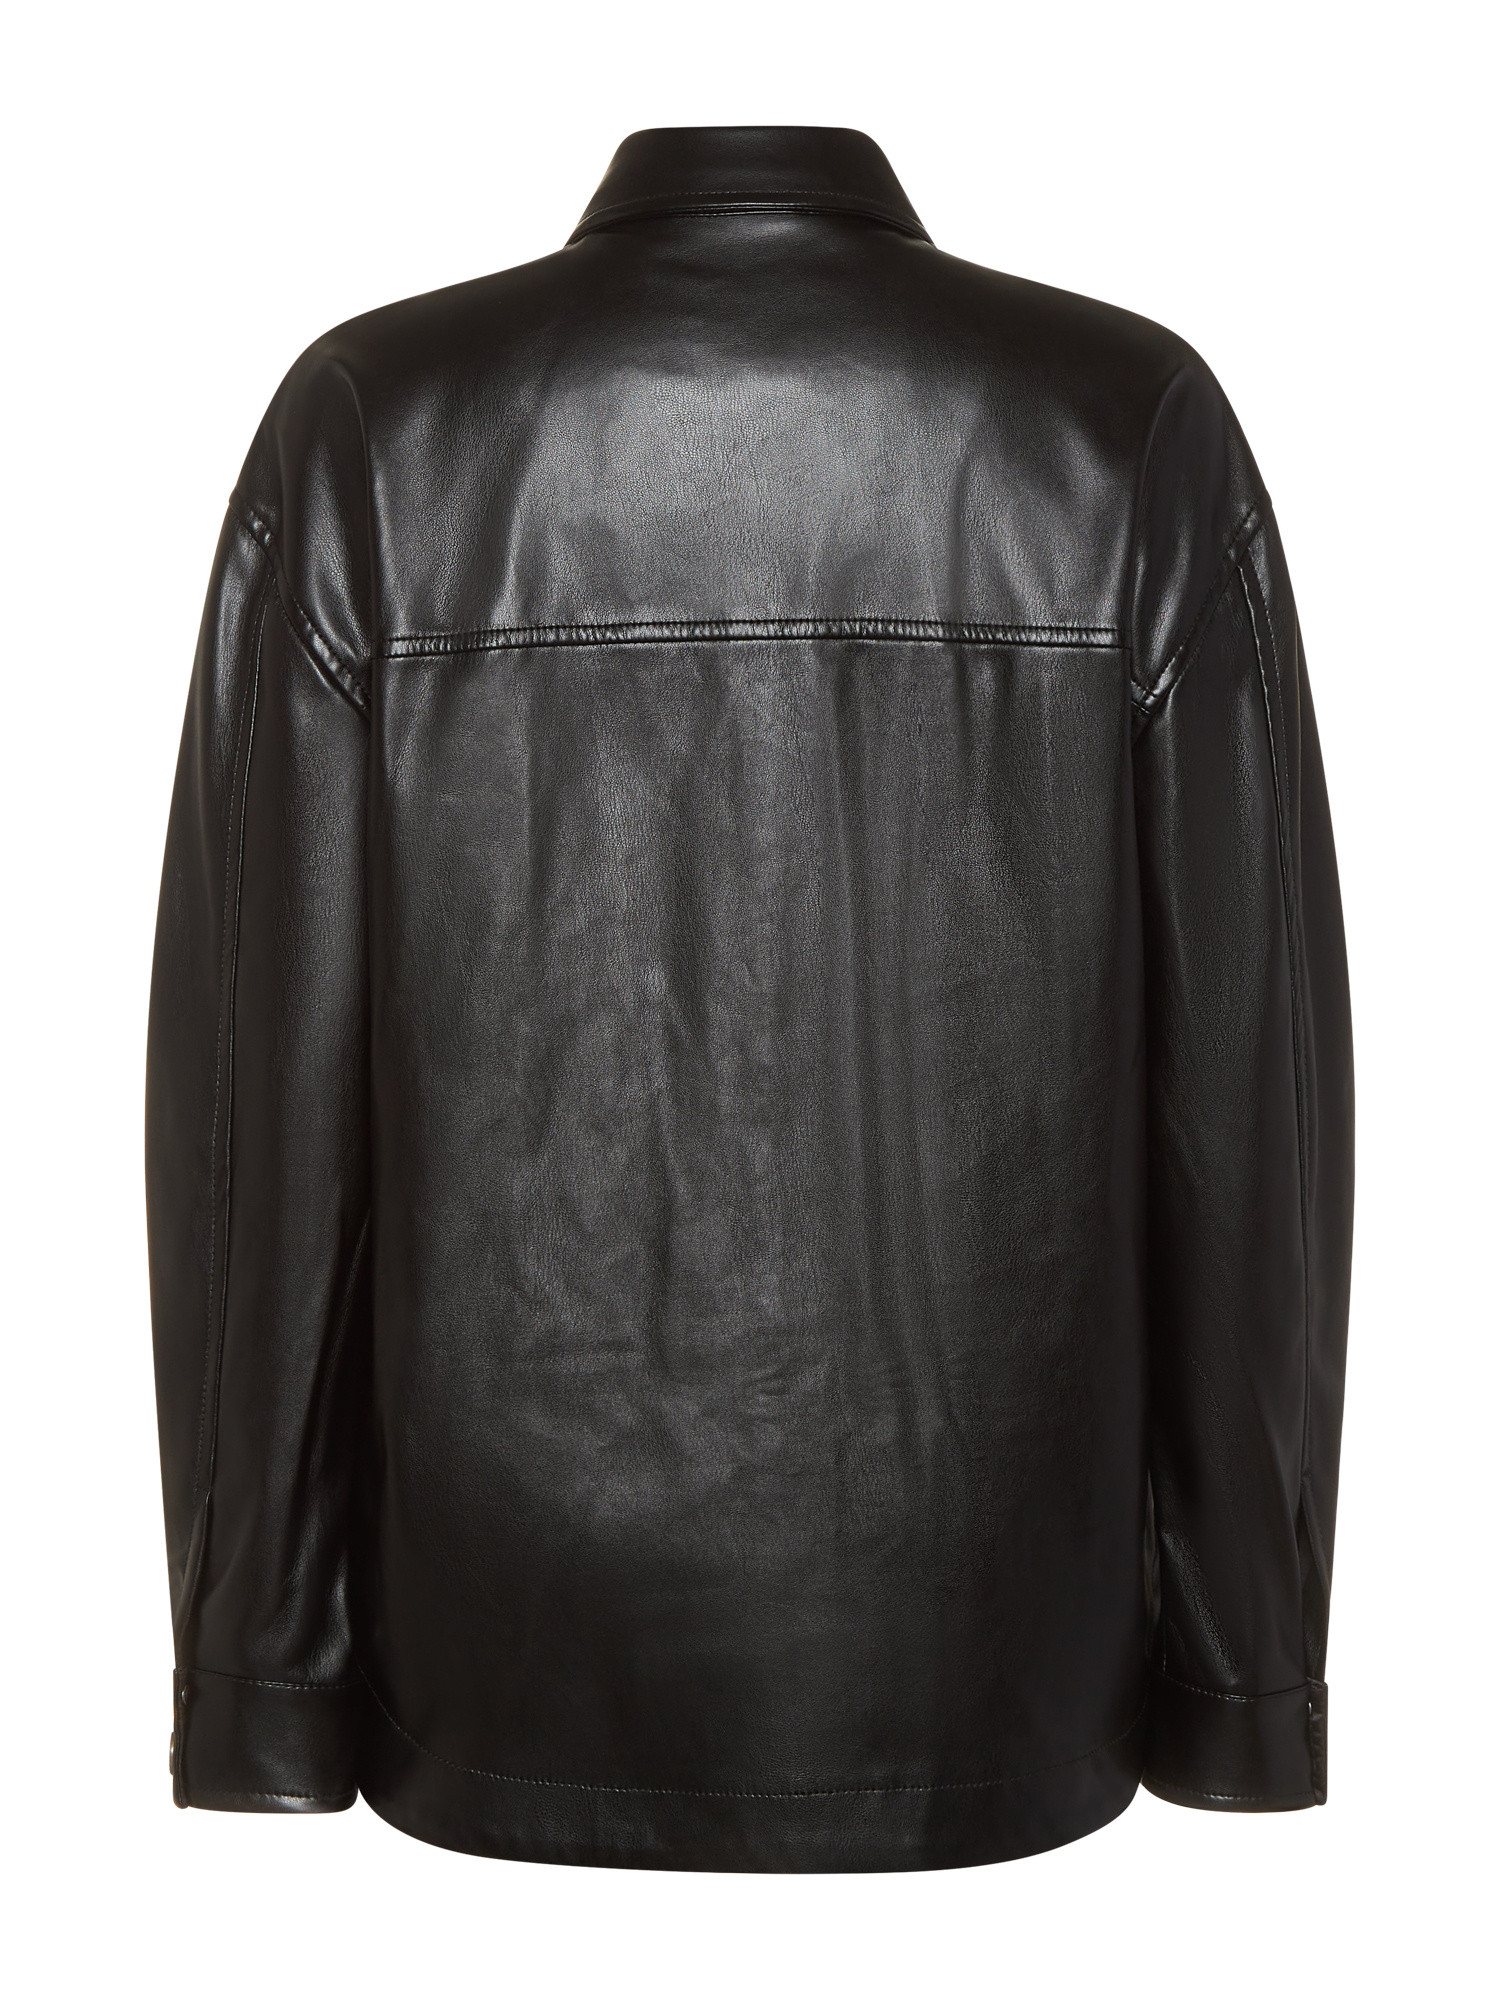 Guess - Faux leather shirt, Black, large image number 1